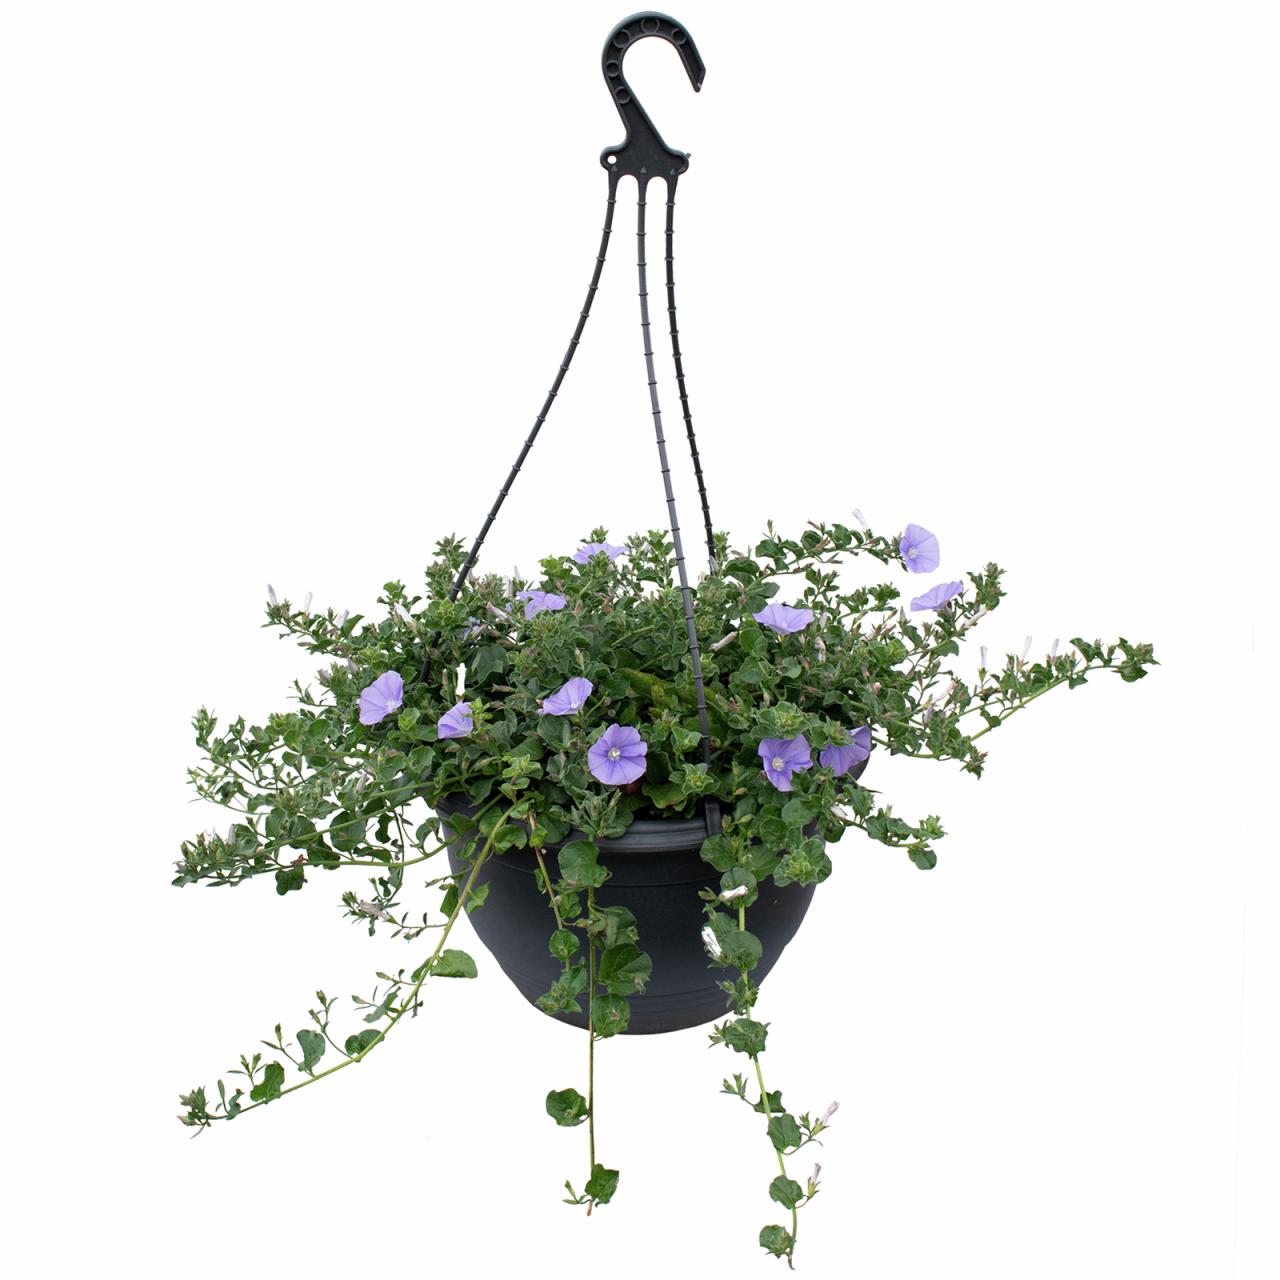 Hanging Plants Indoor | Hanging Flower Baskets from Bunnings: A Guide to Enhance Your Outdoor Oasis